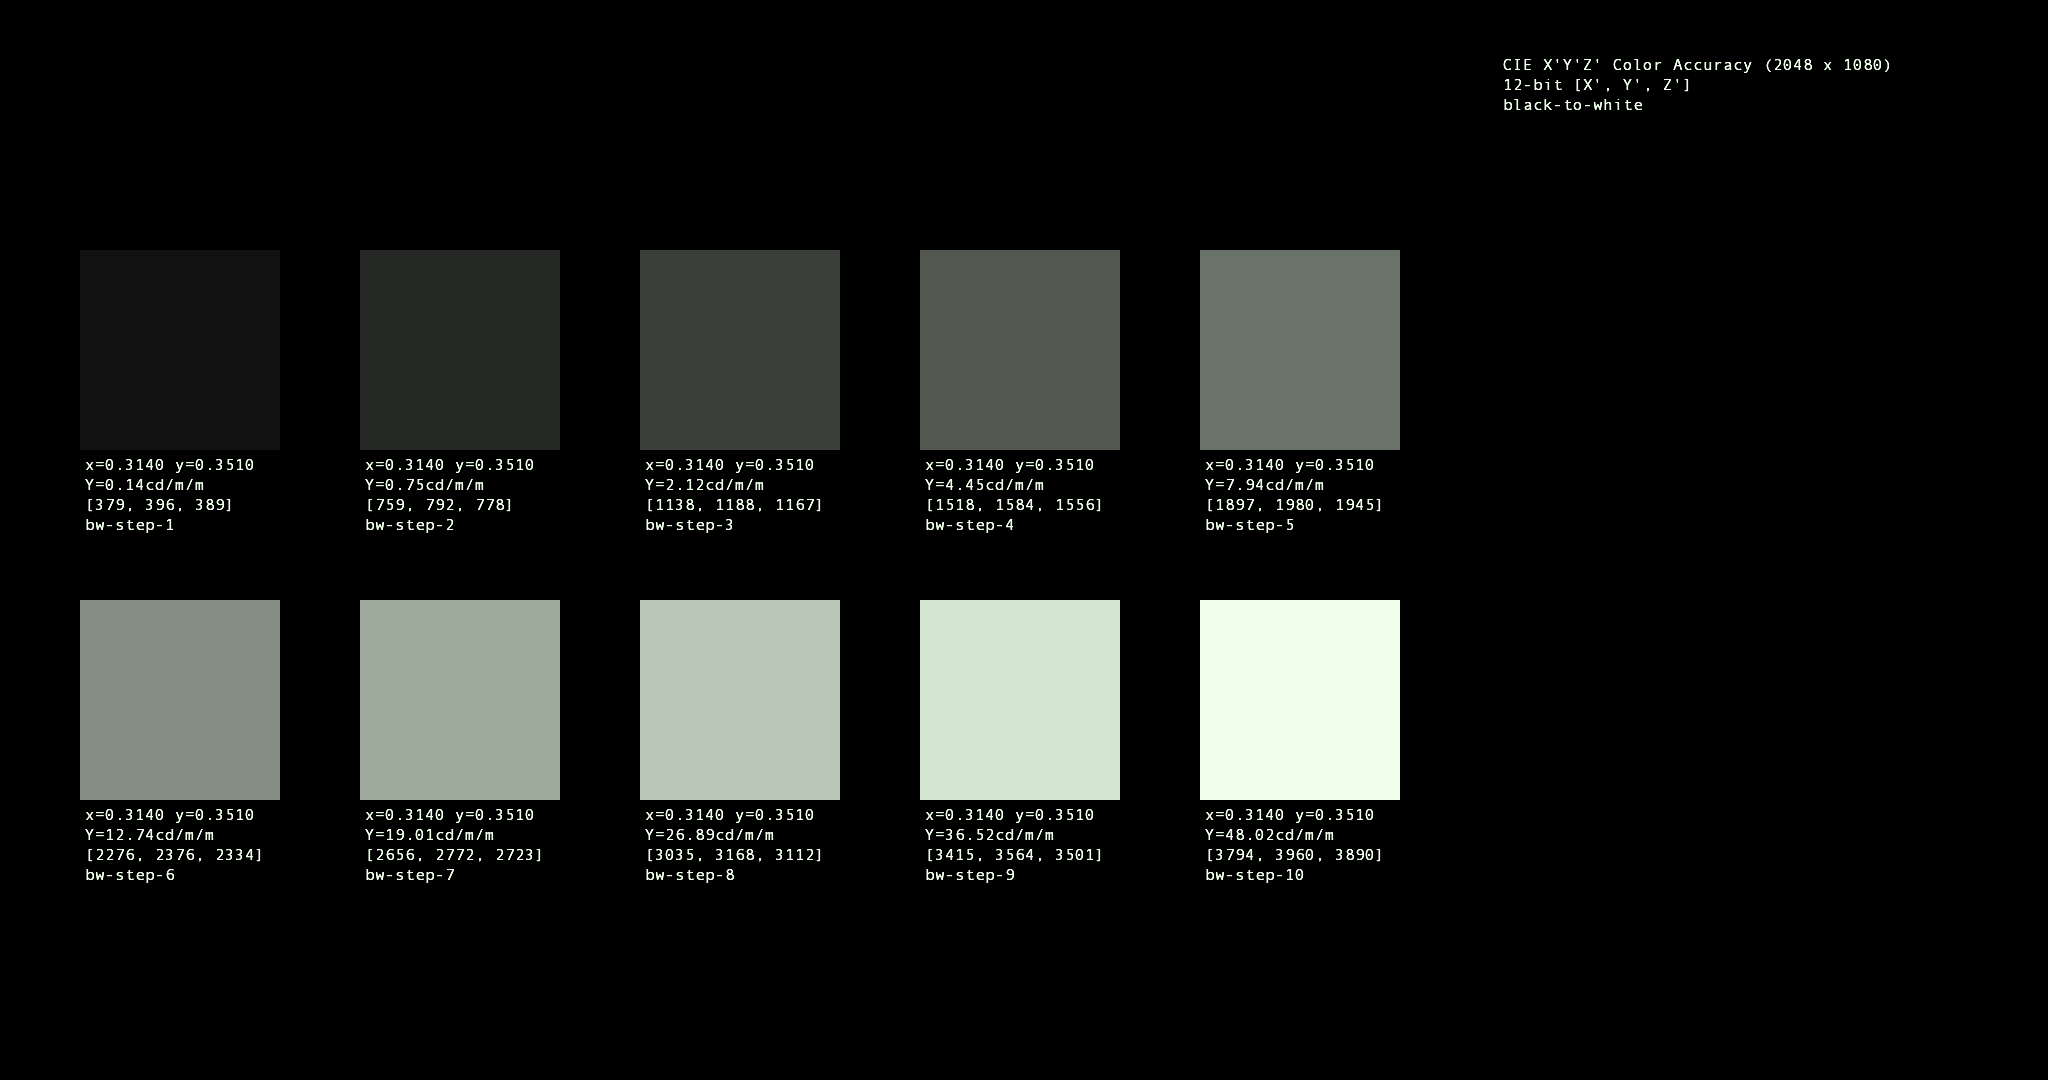 Test pattern showing ten gray step values, from black to white